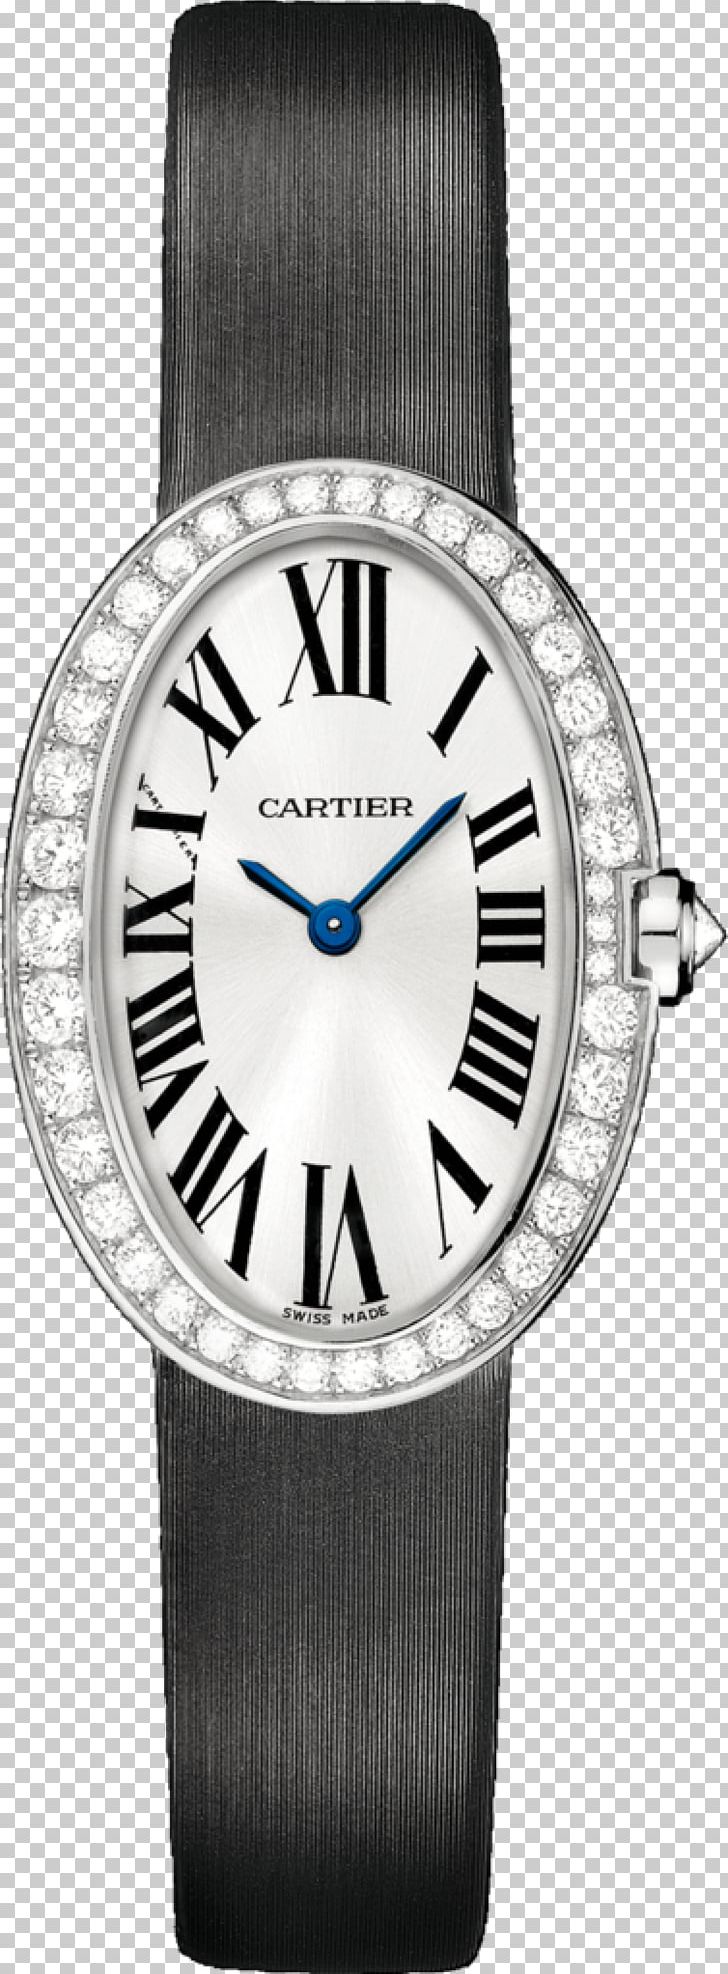 Cartier Watch Jewellery Diamond Cut PNG, Clipart, Accessories, Brand, Brilliant, Carat, Cartier Free PNG Download